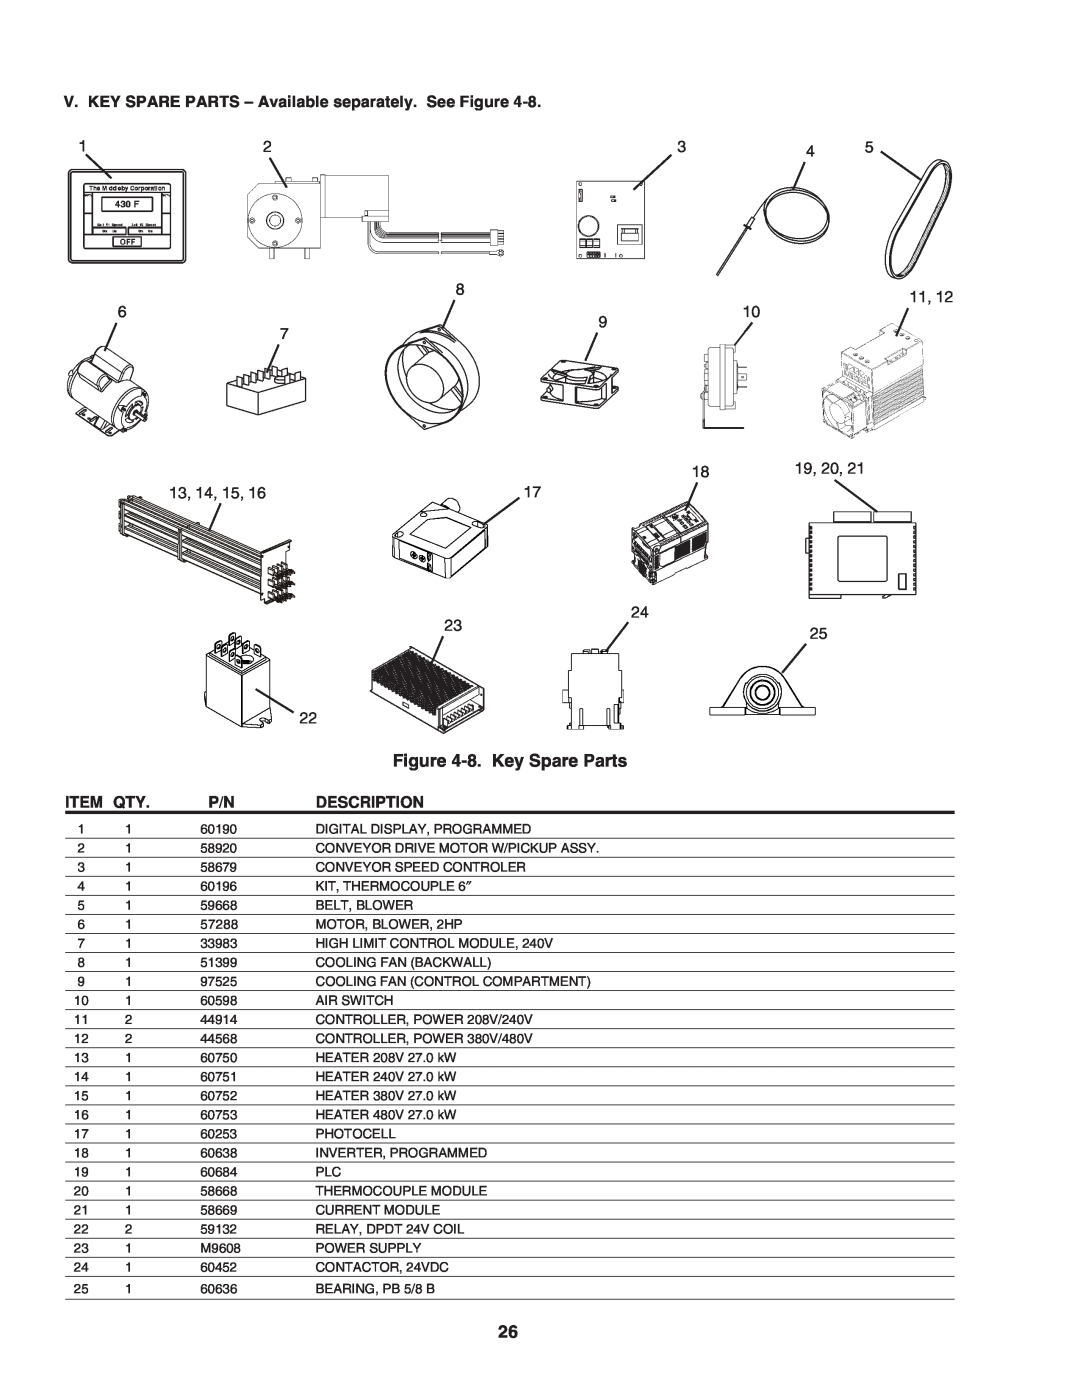 Middleby Marshall PS740E 8. Key Spare Parts, V. KEY SPARE PARTS - Available separately. See Figure, Item Qty, Description 